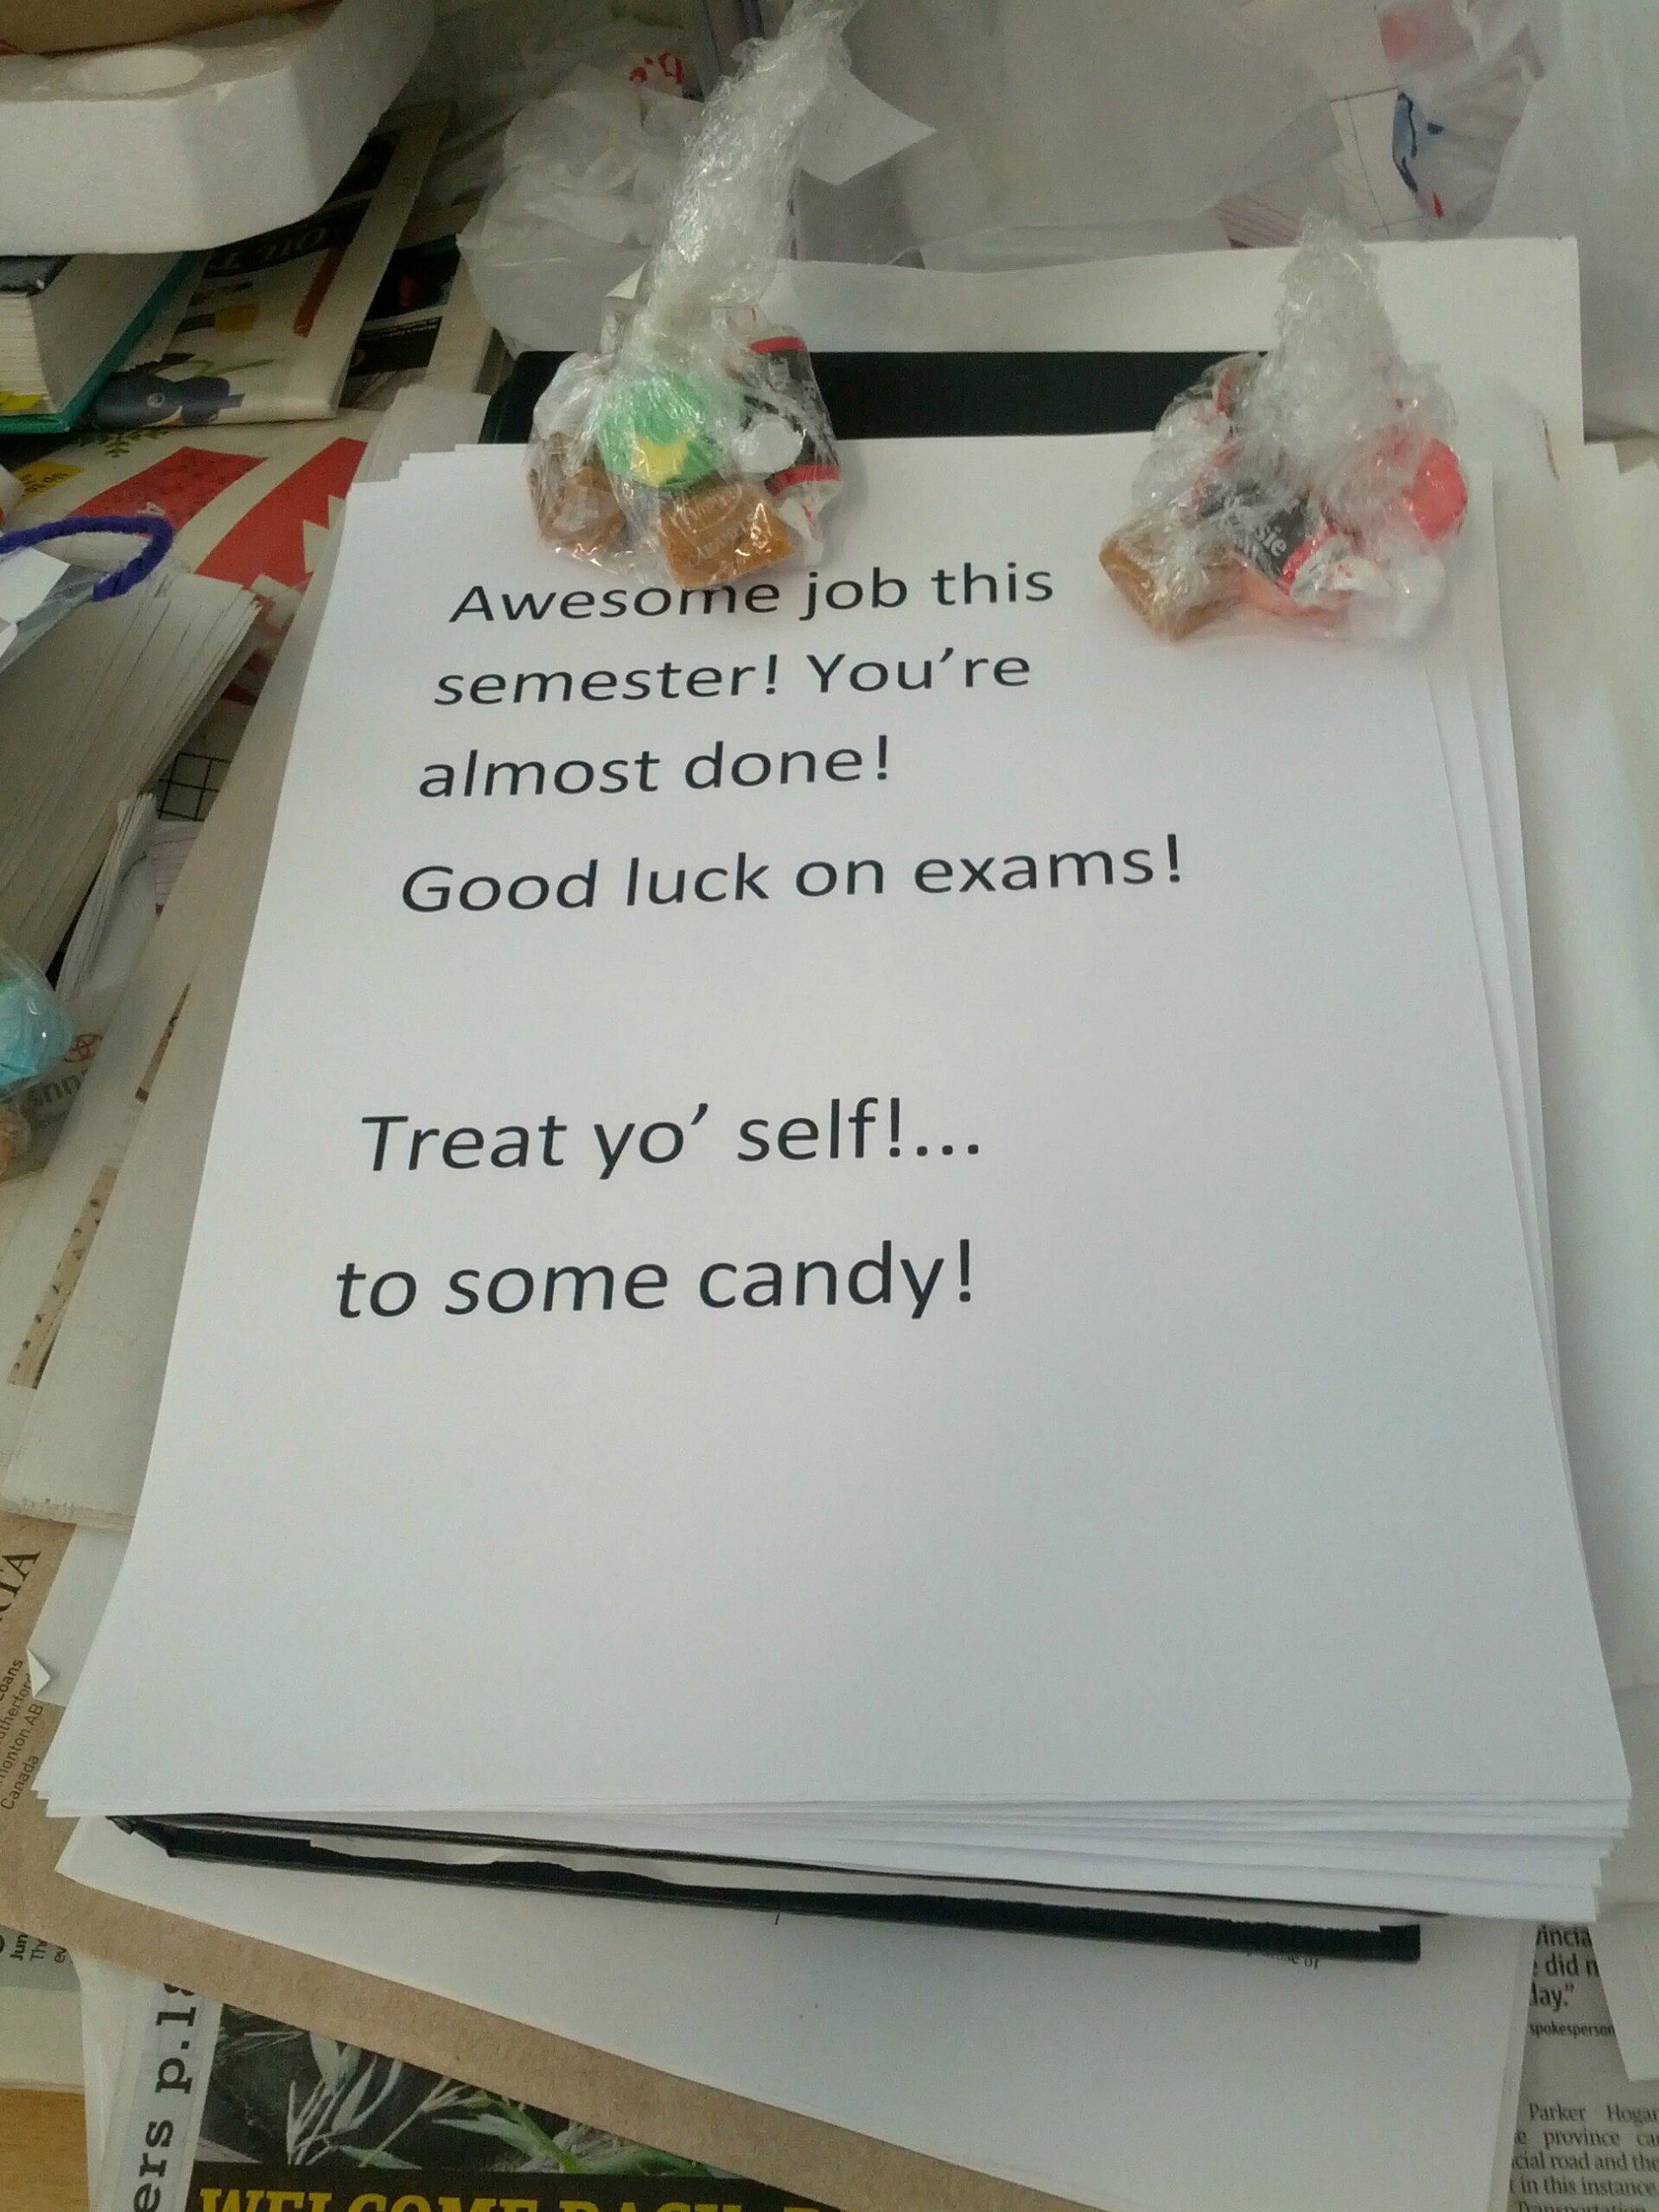 candy and notes of encouragement for students in their last week of the semester